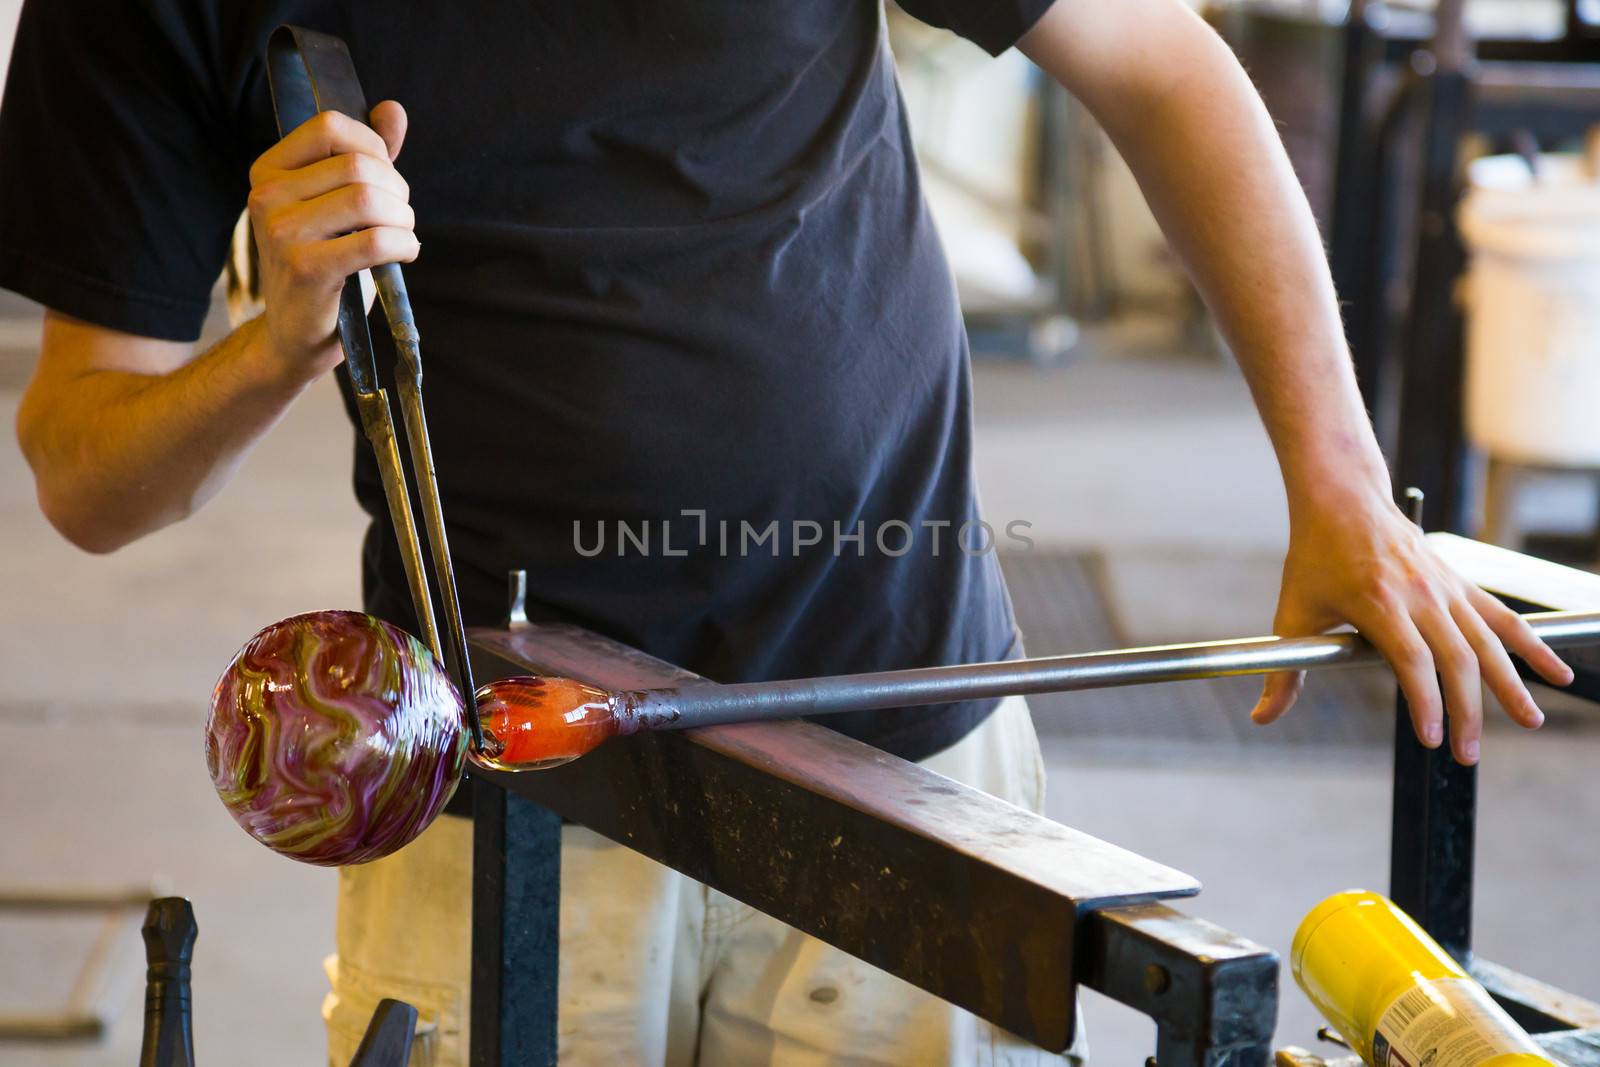 A man takes motlen glass and shapes it using some specialized tools for glassblowing art.